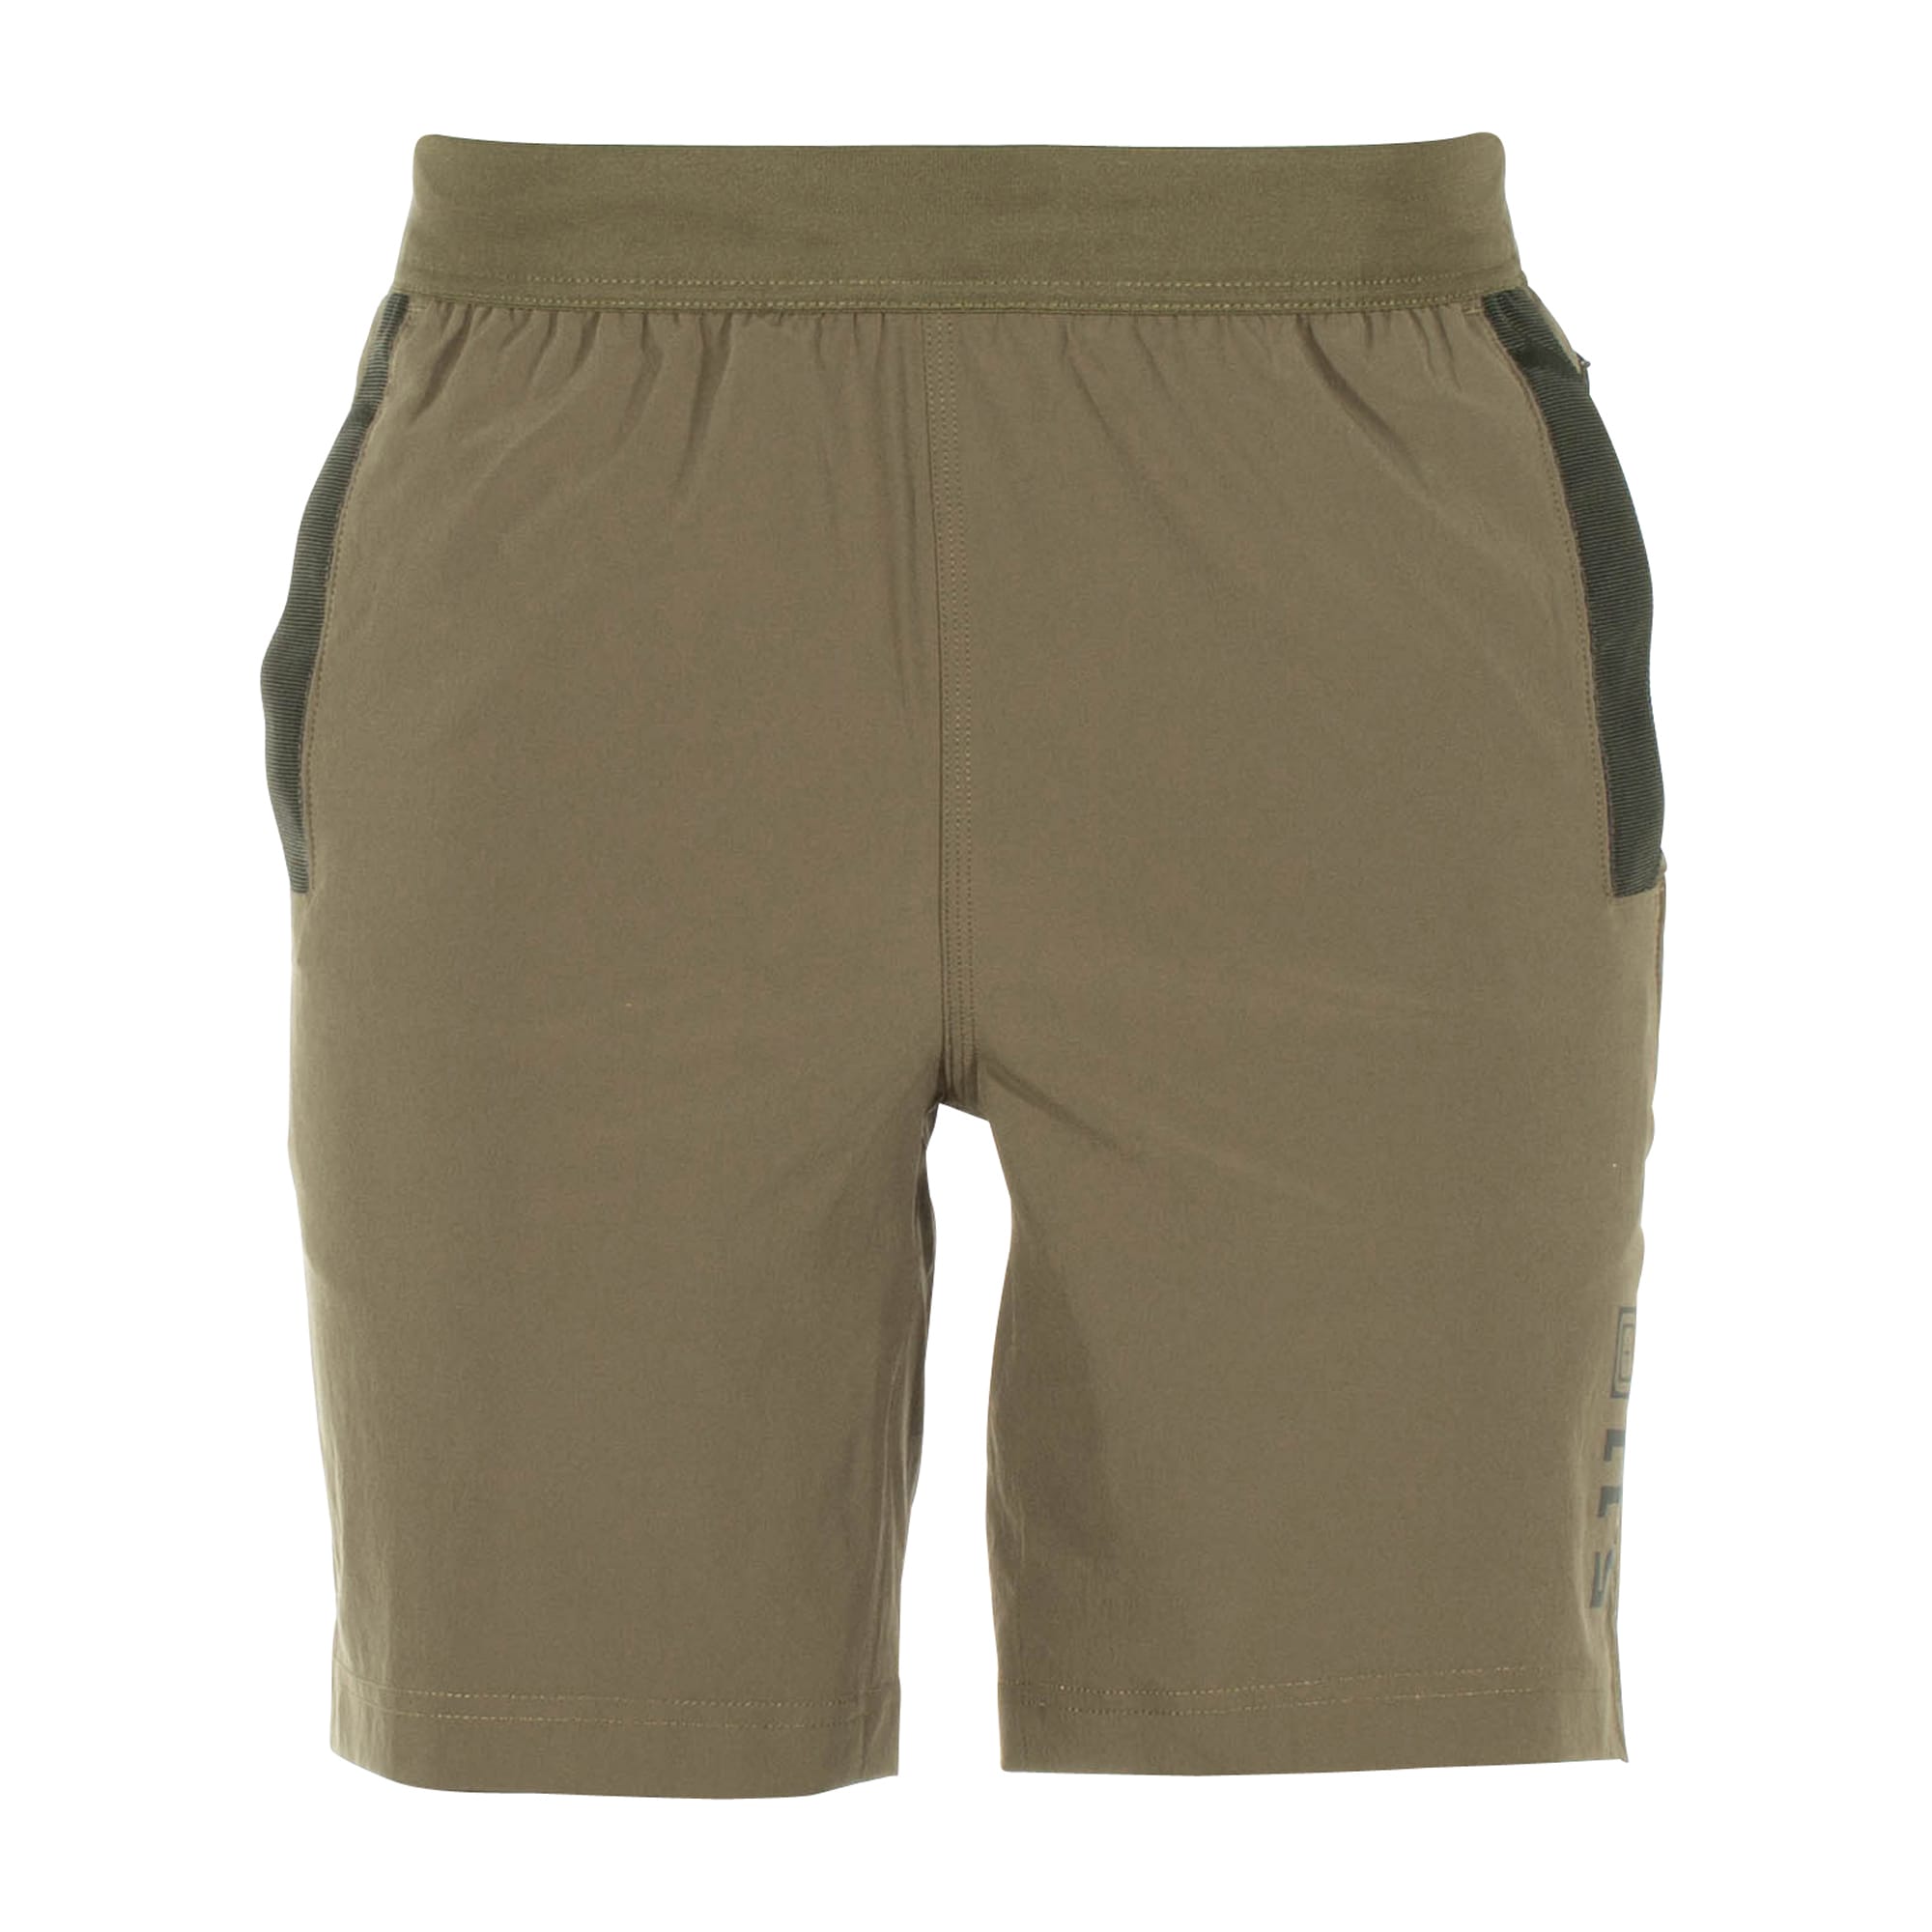 Purchase the 5.11 Shorts PT-R Havoc ranger green by ASMC